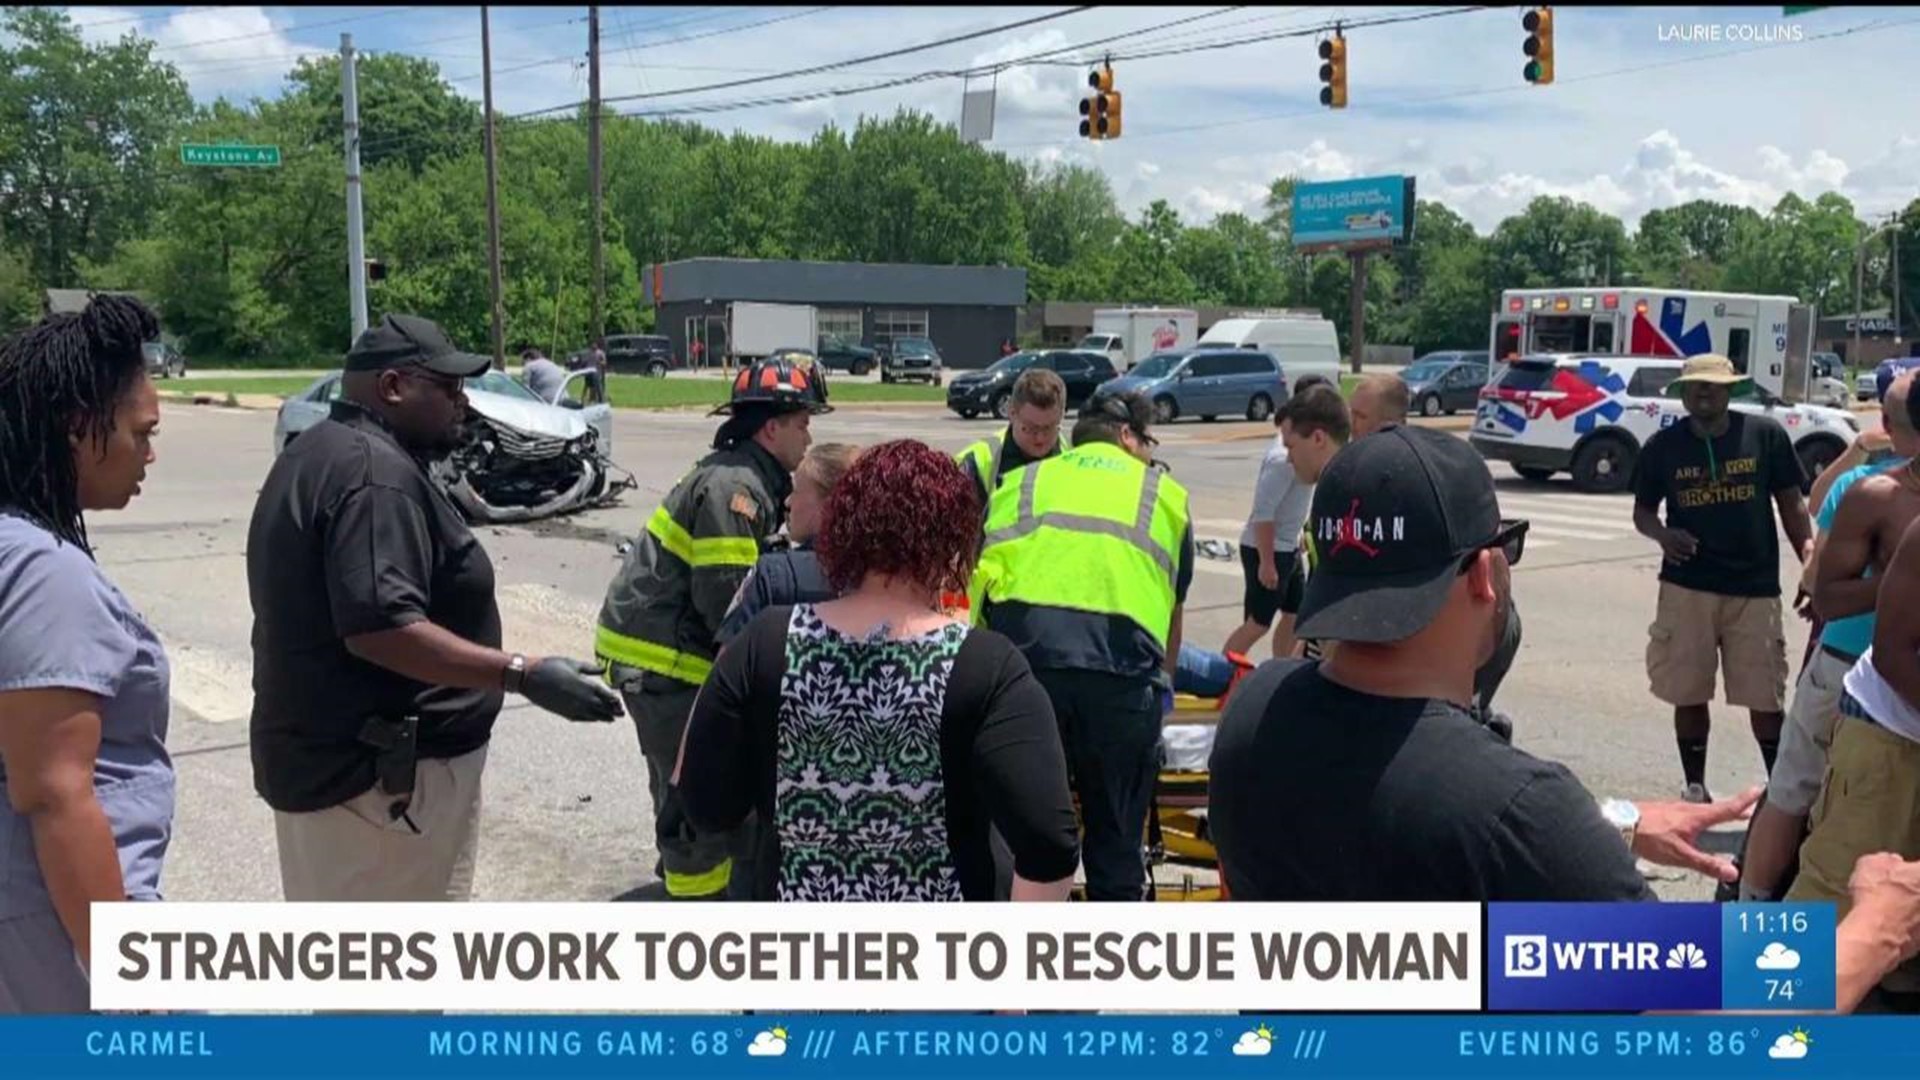 Strangers work together to rescue woman